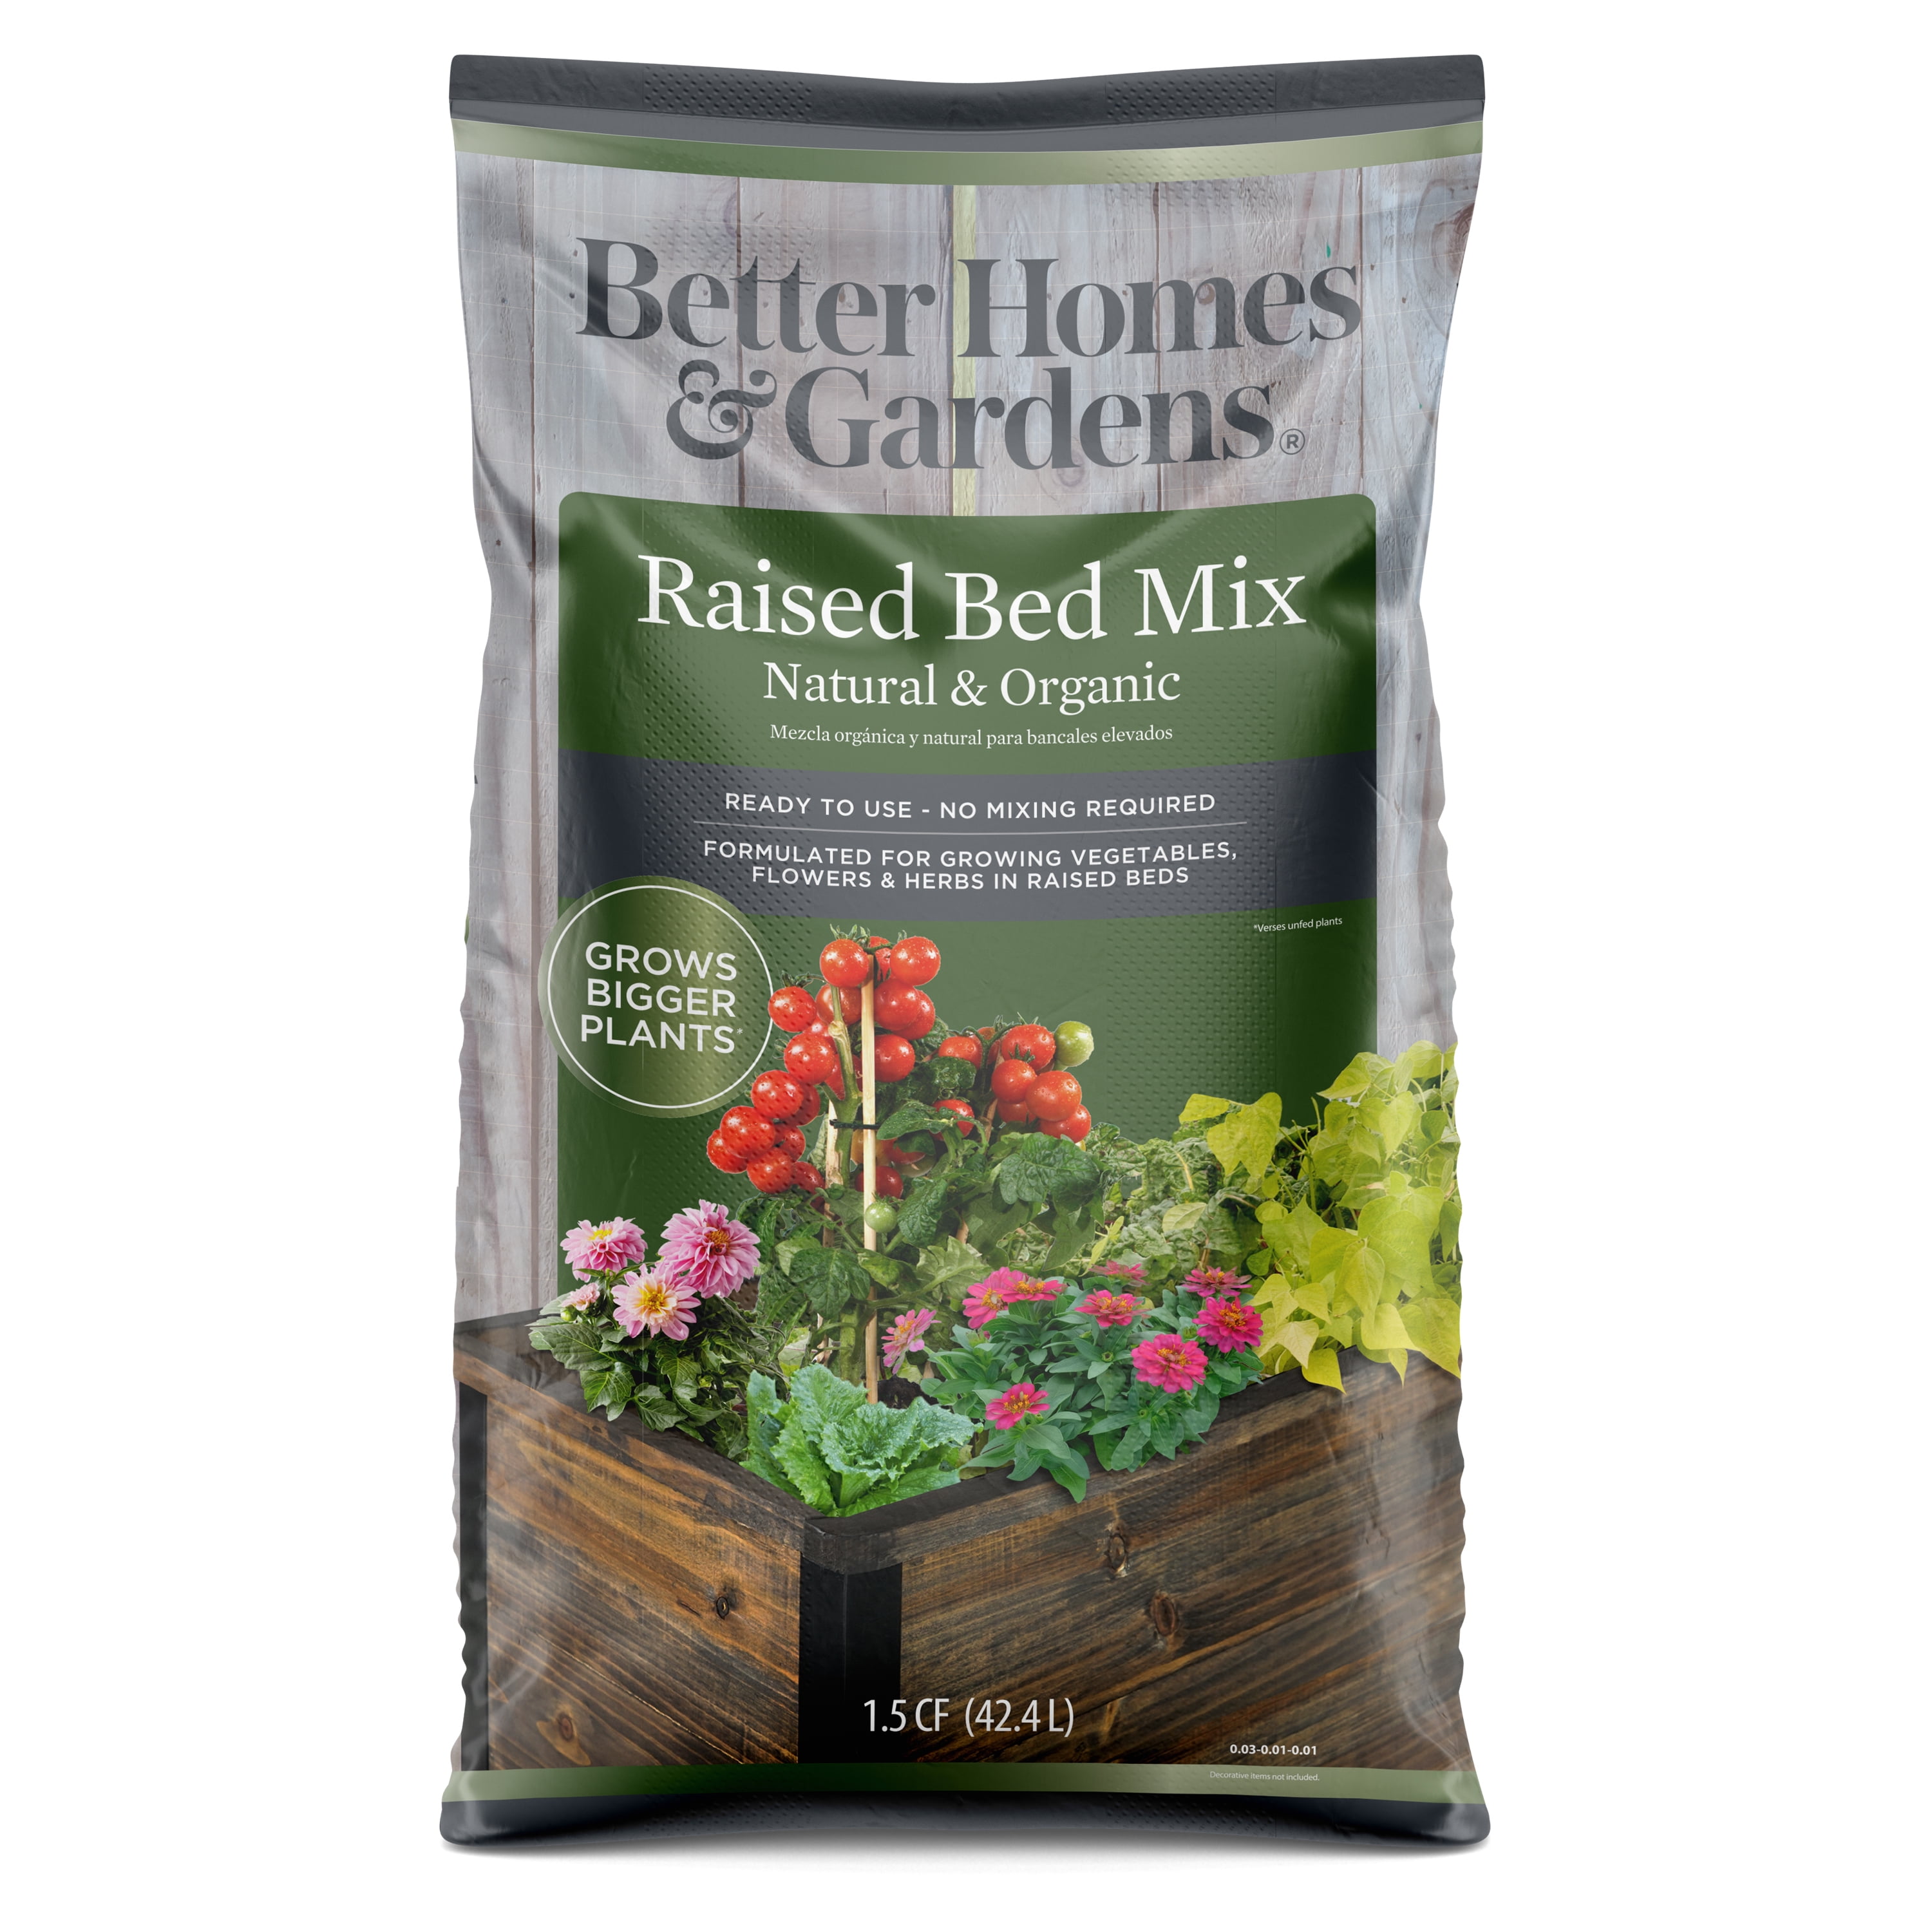 Better Homes & Gardens Organic Raised Bed Planting Mix, 1.5 cu. ft. Bag